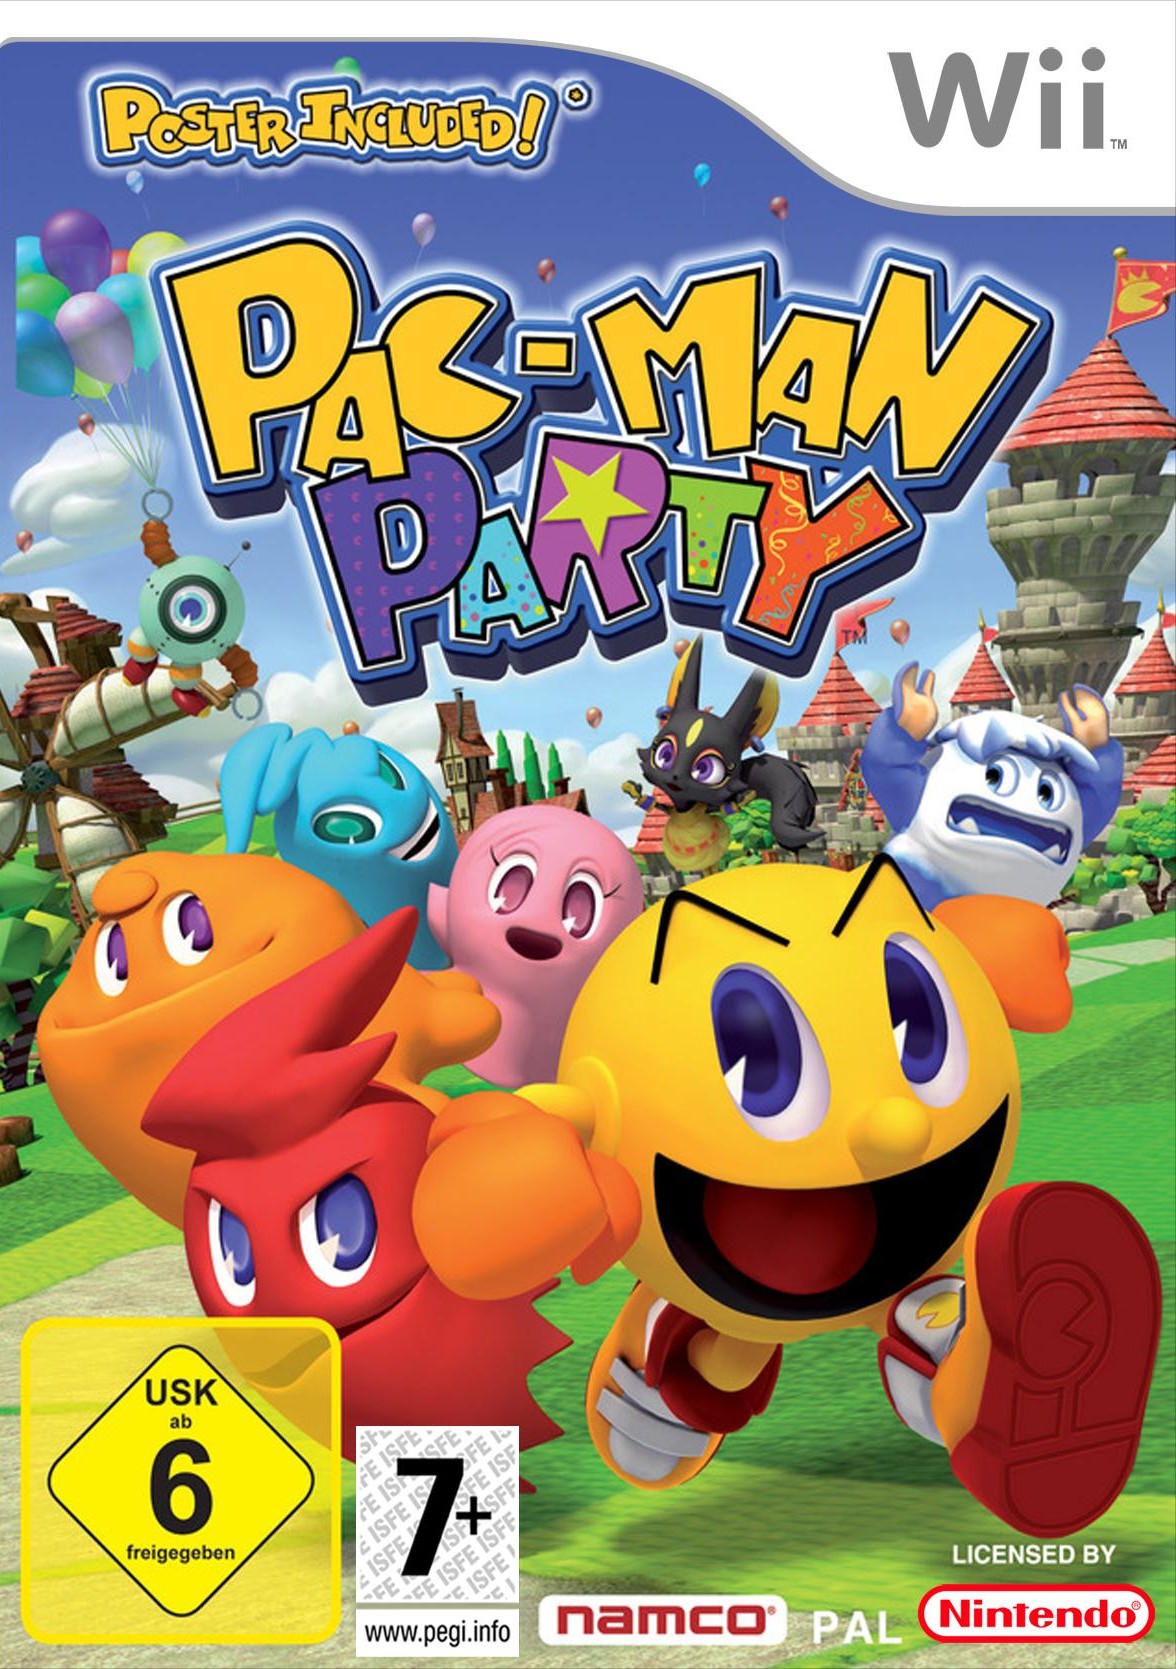 pac-man-party-details-launchbox-games-database